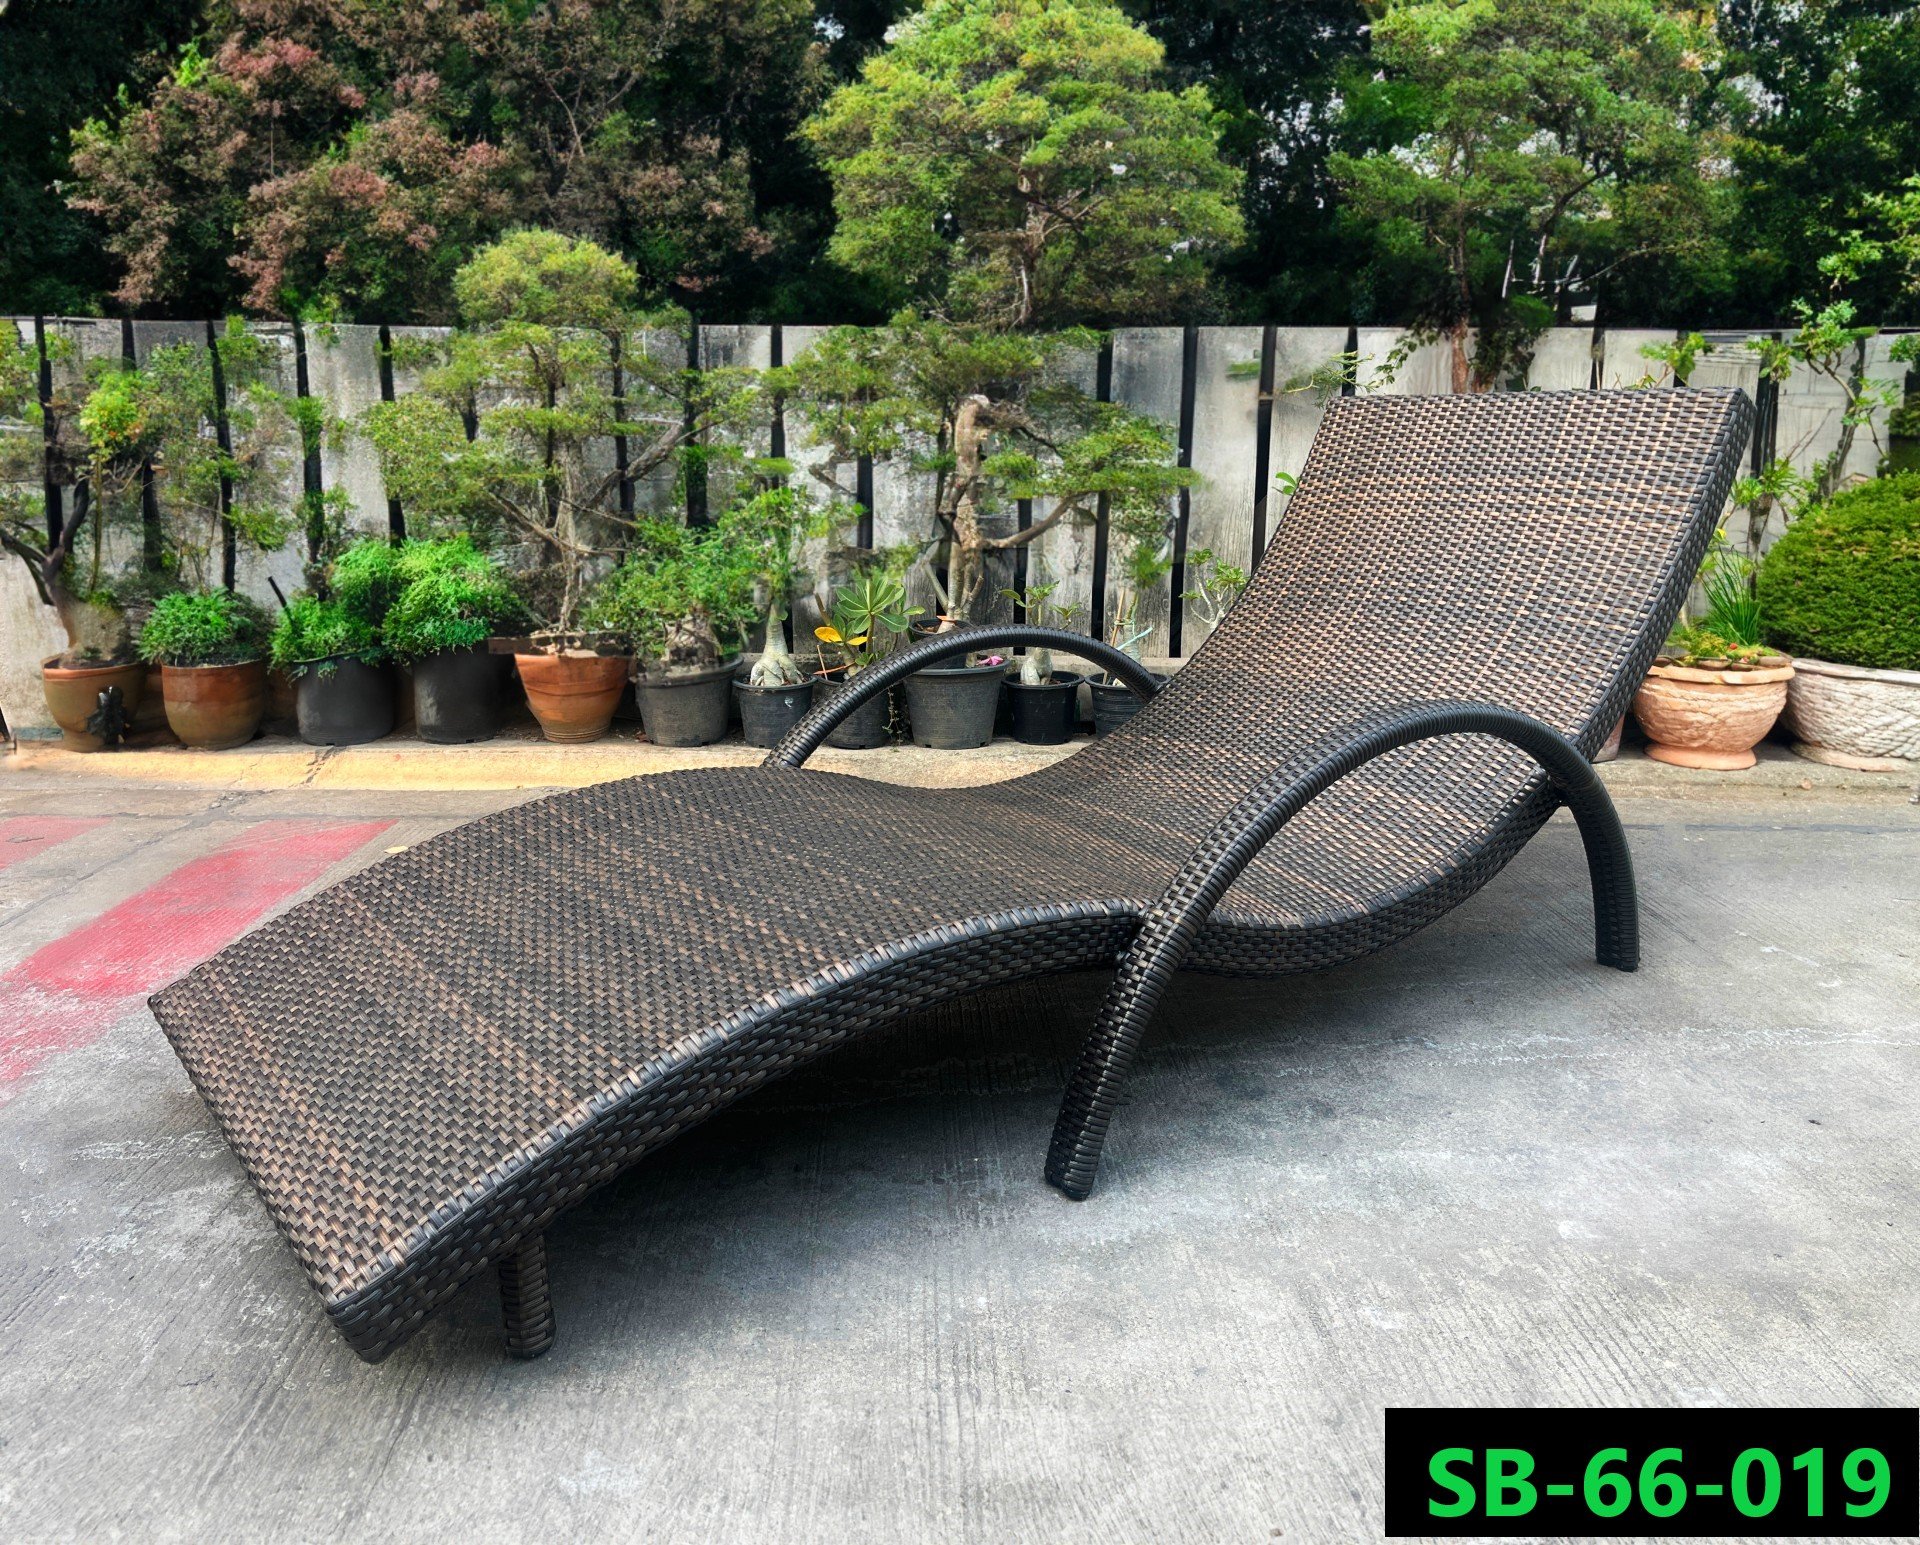 Rattan Sun Lounger/Bed Product code SB-66-019